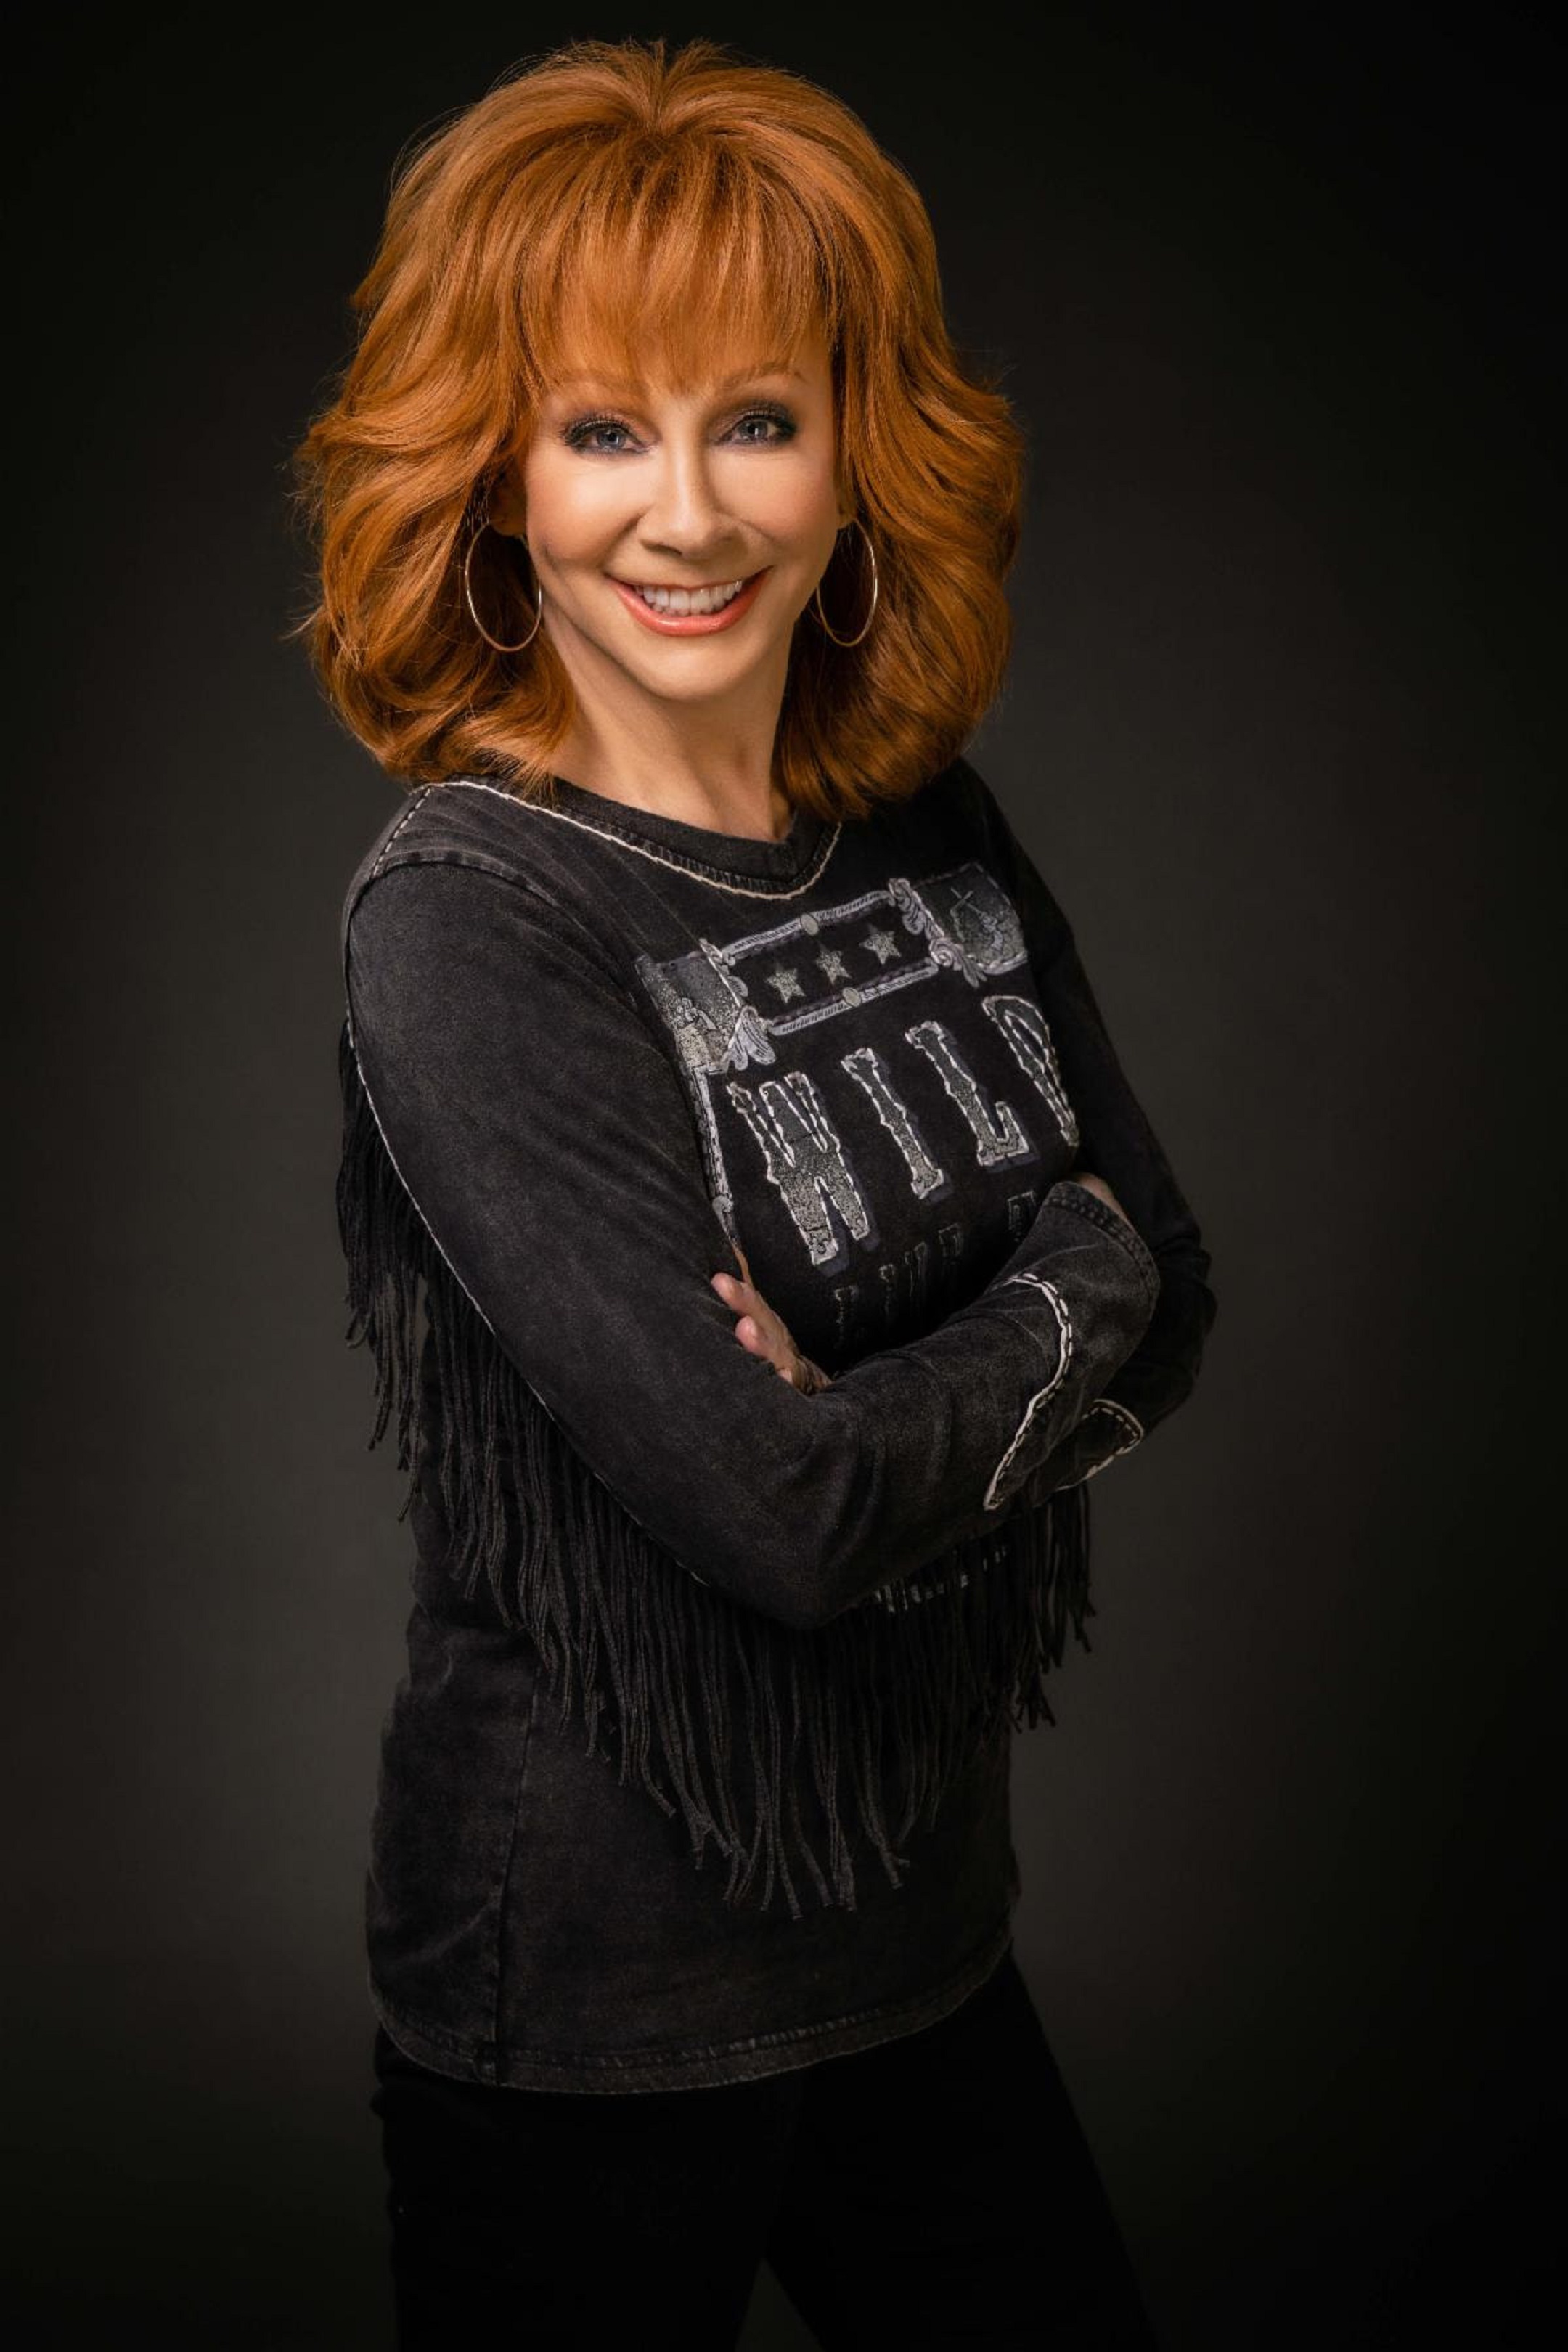 Country Superstar Reba McEntire Will Take the Stage at the Ryman for ‘An Evening With Reba & Friends’